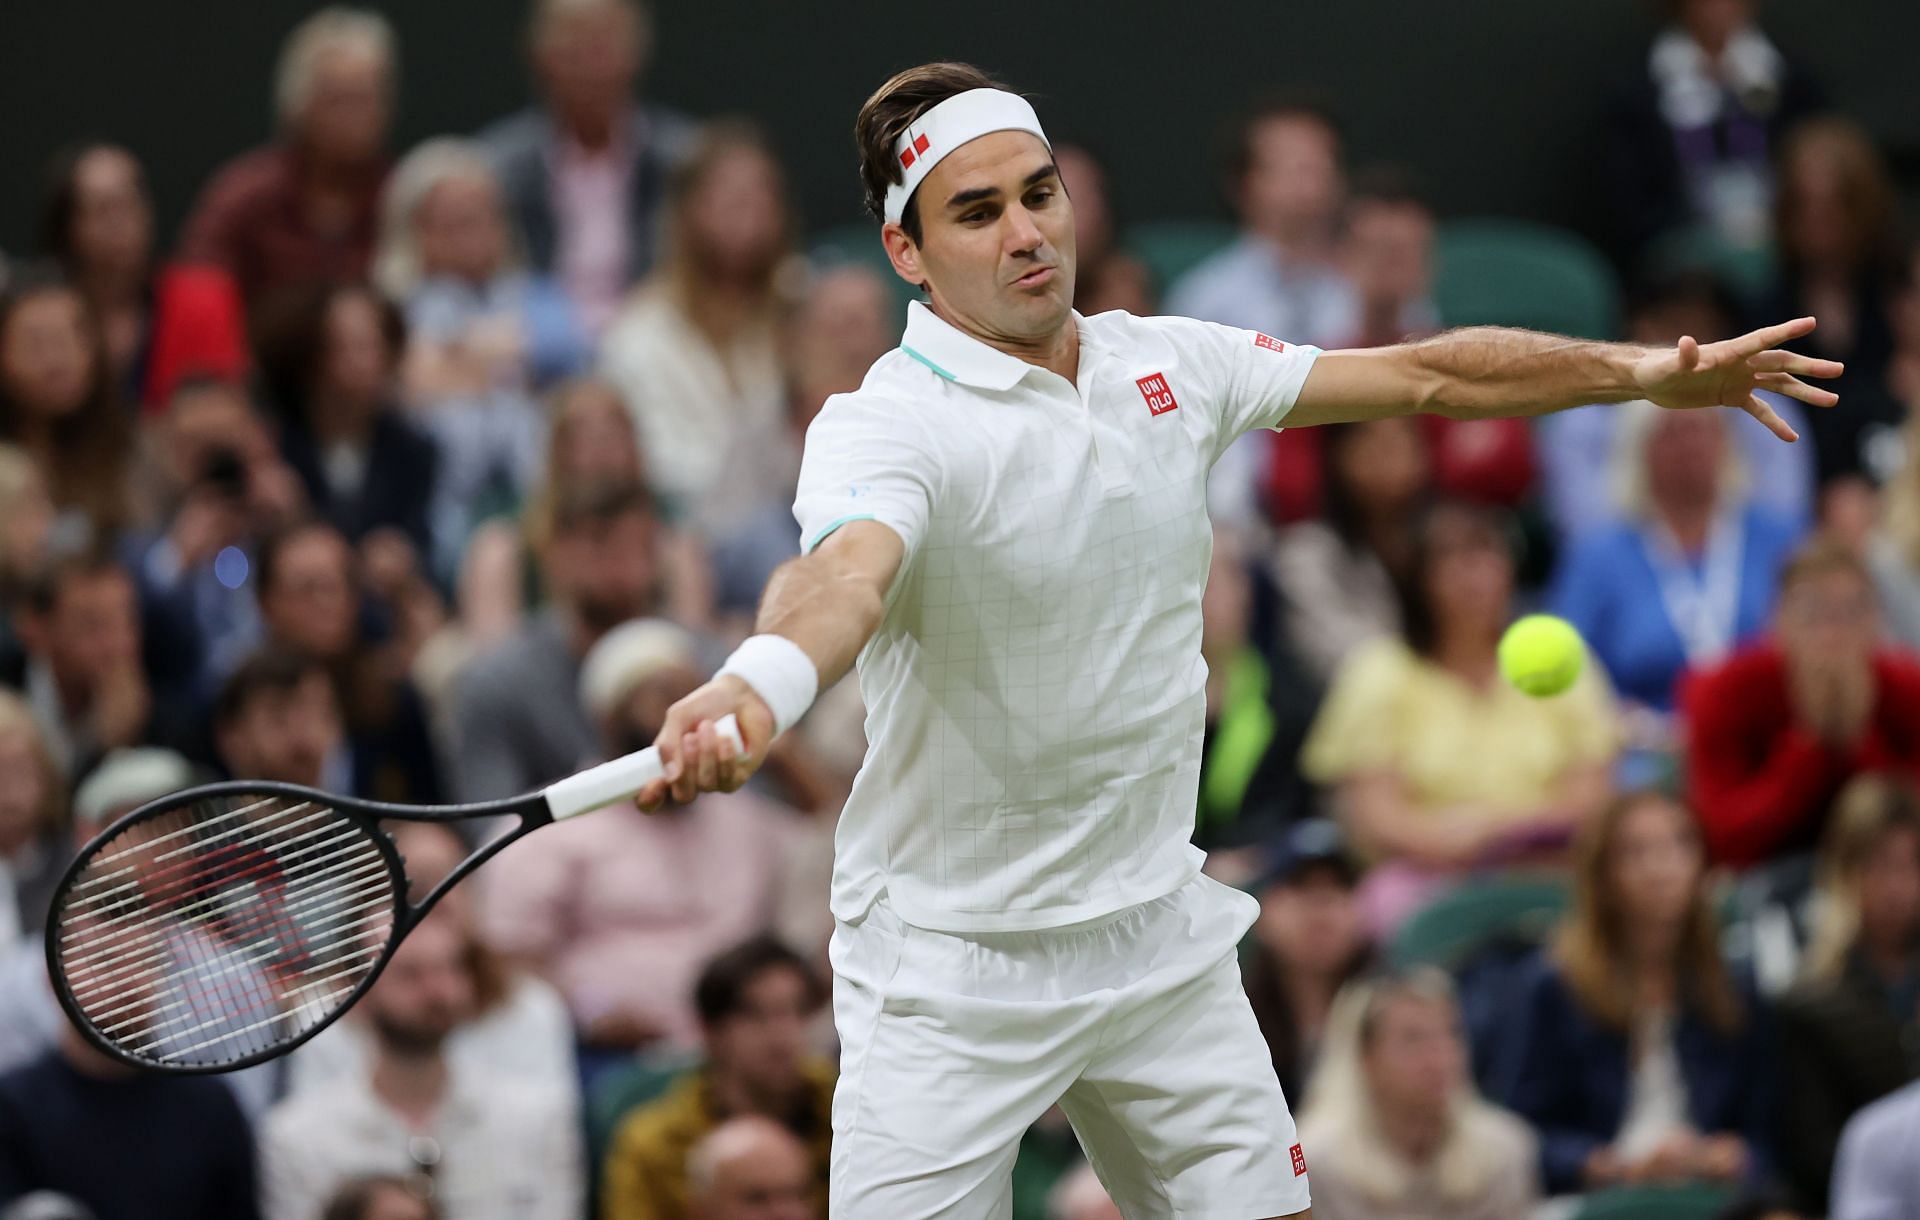 Roger Federer in action at the 2021 Wimbledon - Day Seven